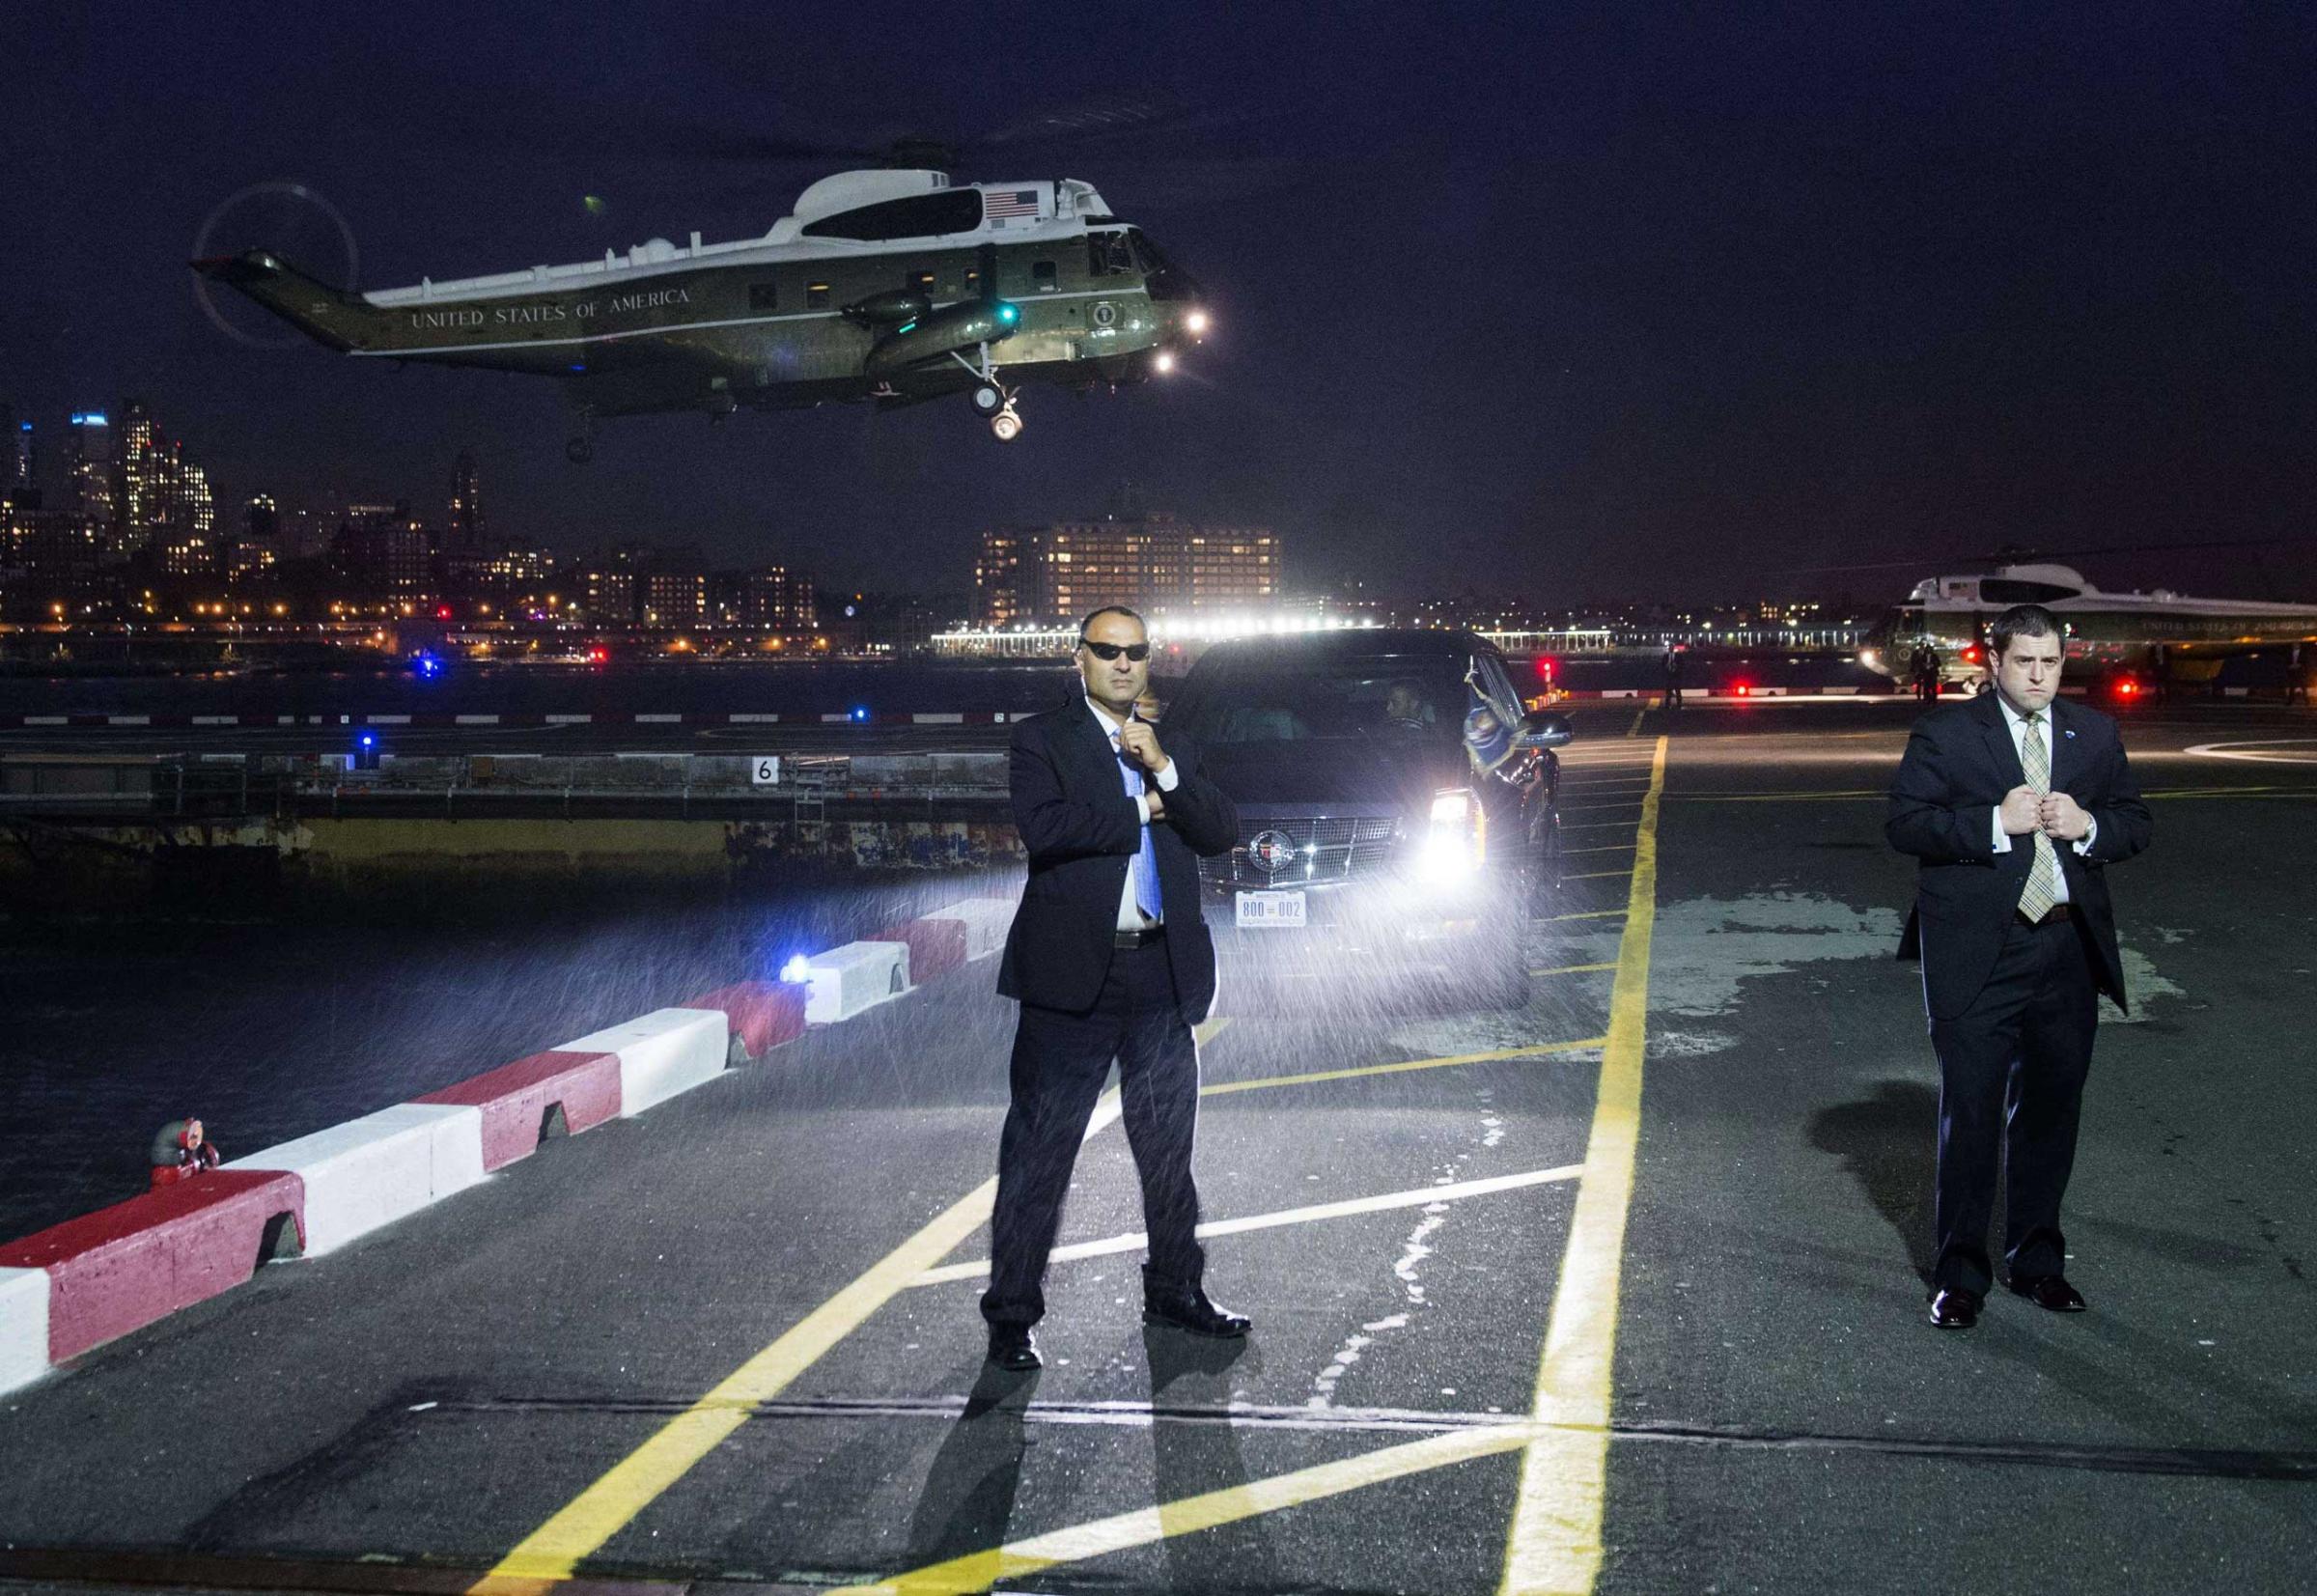 U.S. Secret Service Agents stand guard as Marine One, with U.S. President Barack Obama on board, prepares to land at the Downtown Manhattan Heliport in New York City. President Obama is traveling to attend Democratic fundraisers. Nov. 2, 2015